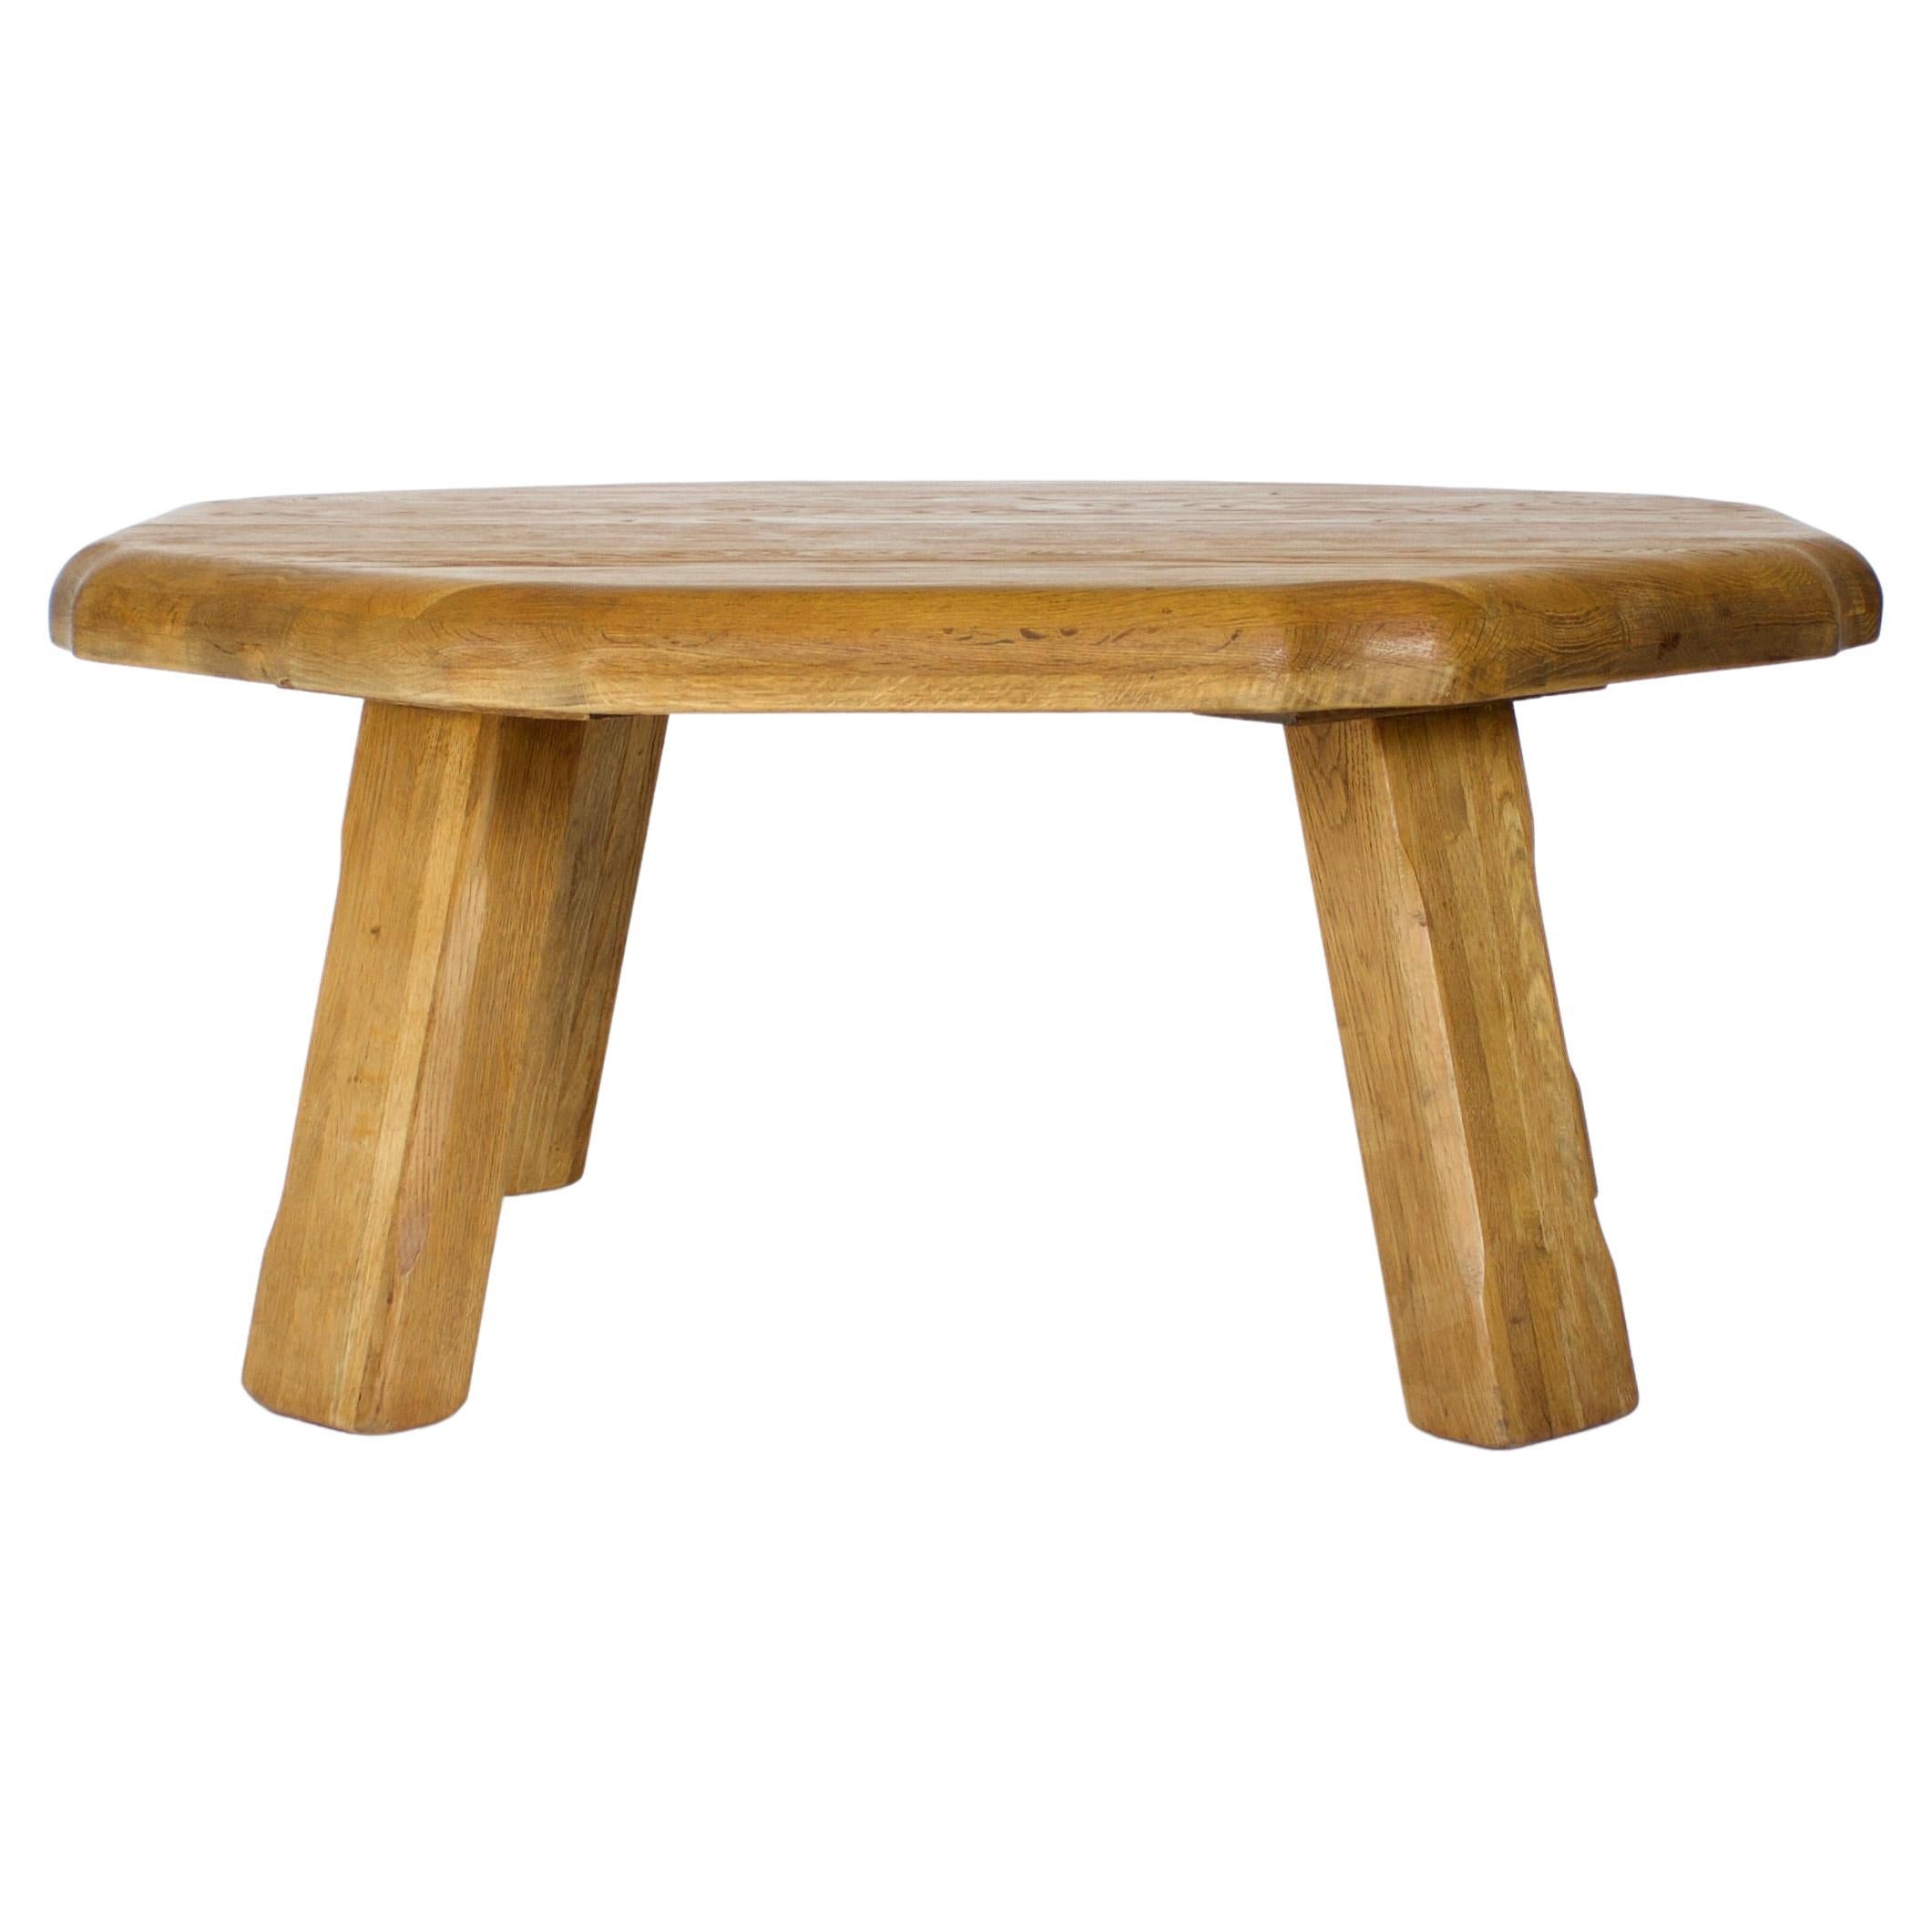 French Oak Round Sculpted Free Form Edge Brutalist Coffee Table, circa 1960